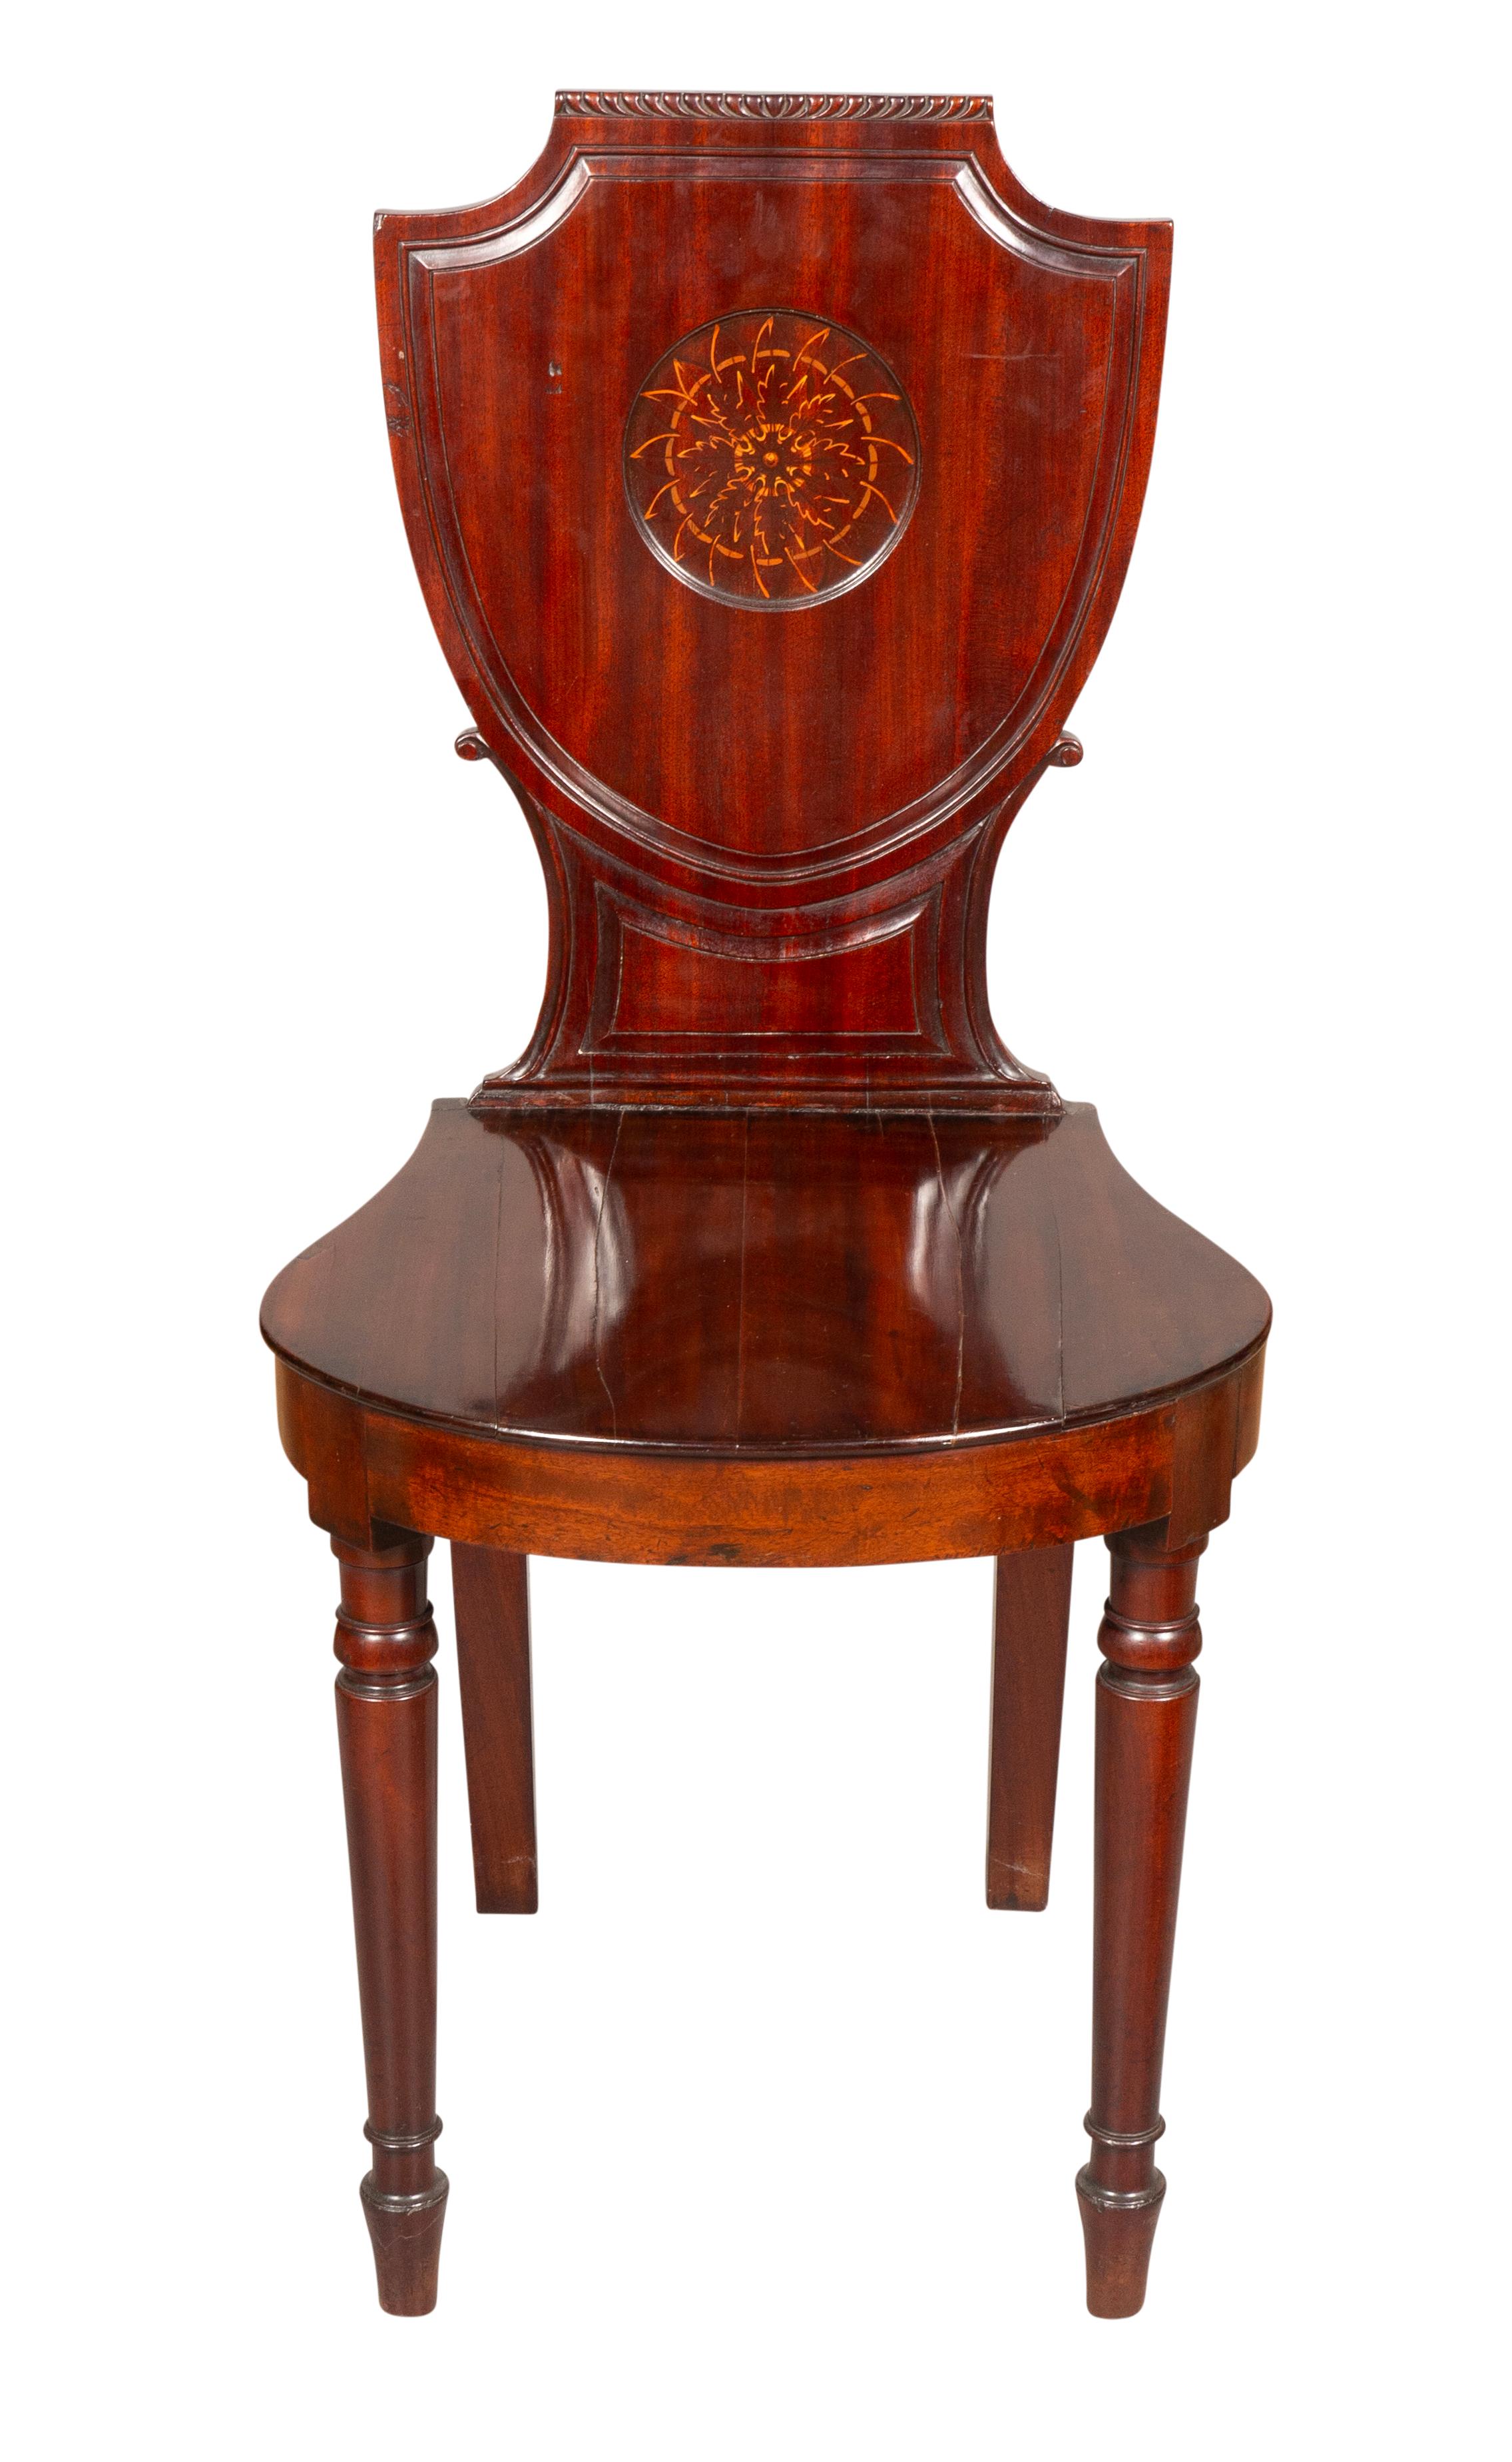 Shield form backs with central painted roundel. The bowed seat raised on circular tapered legs.